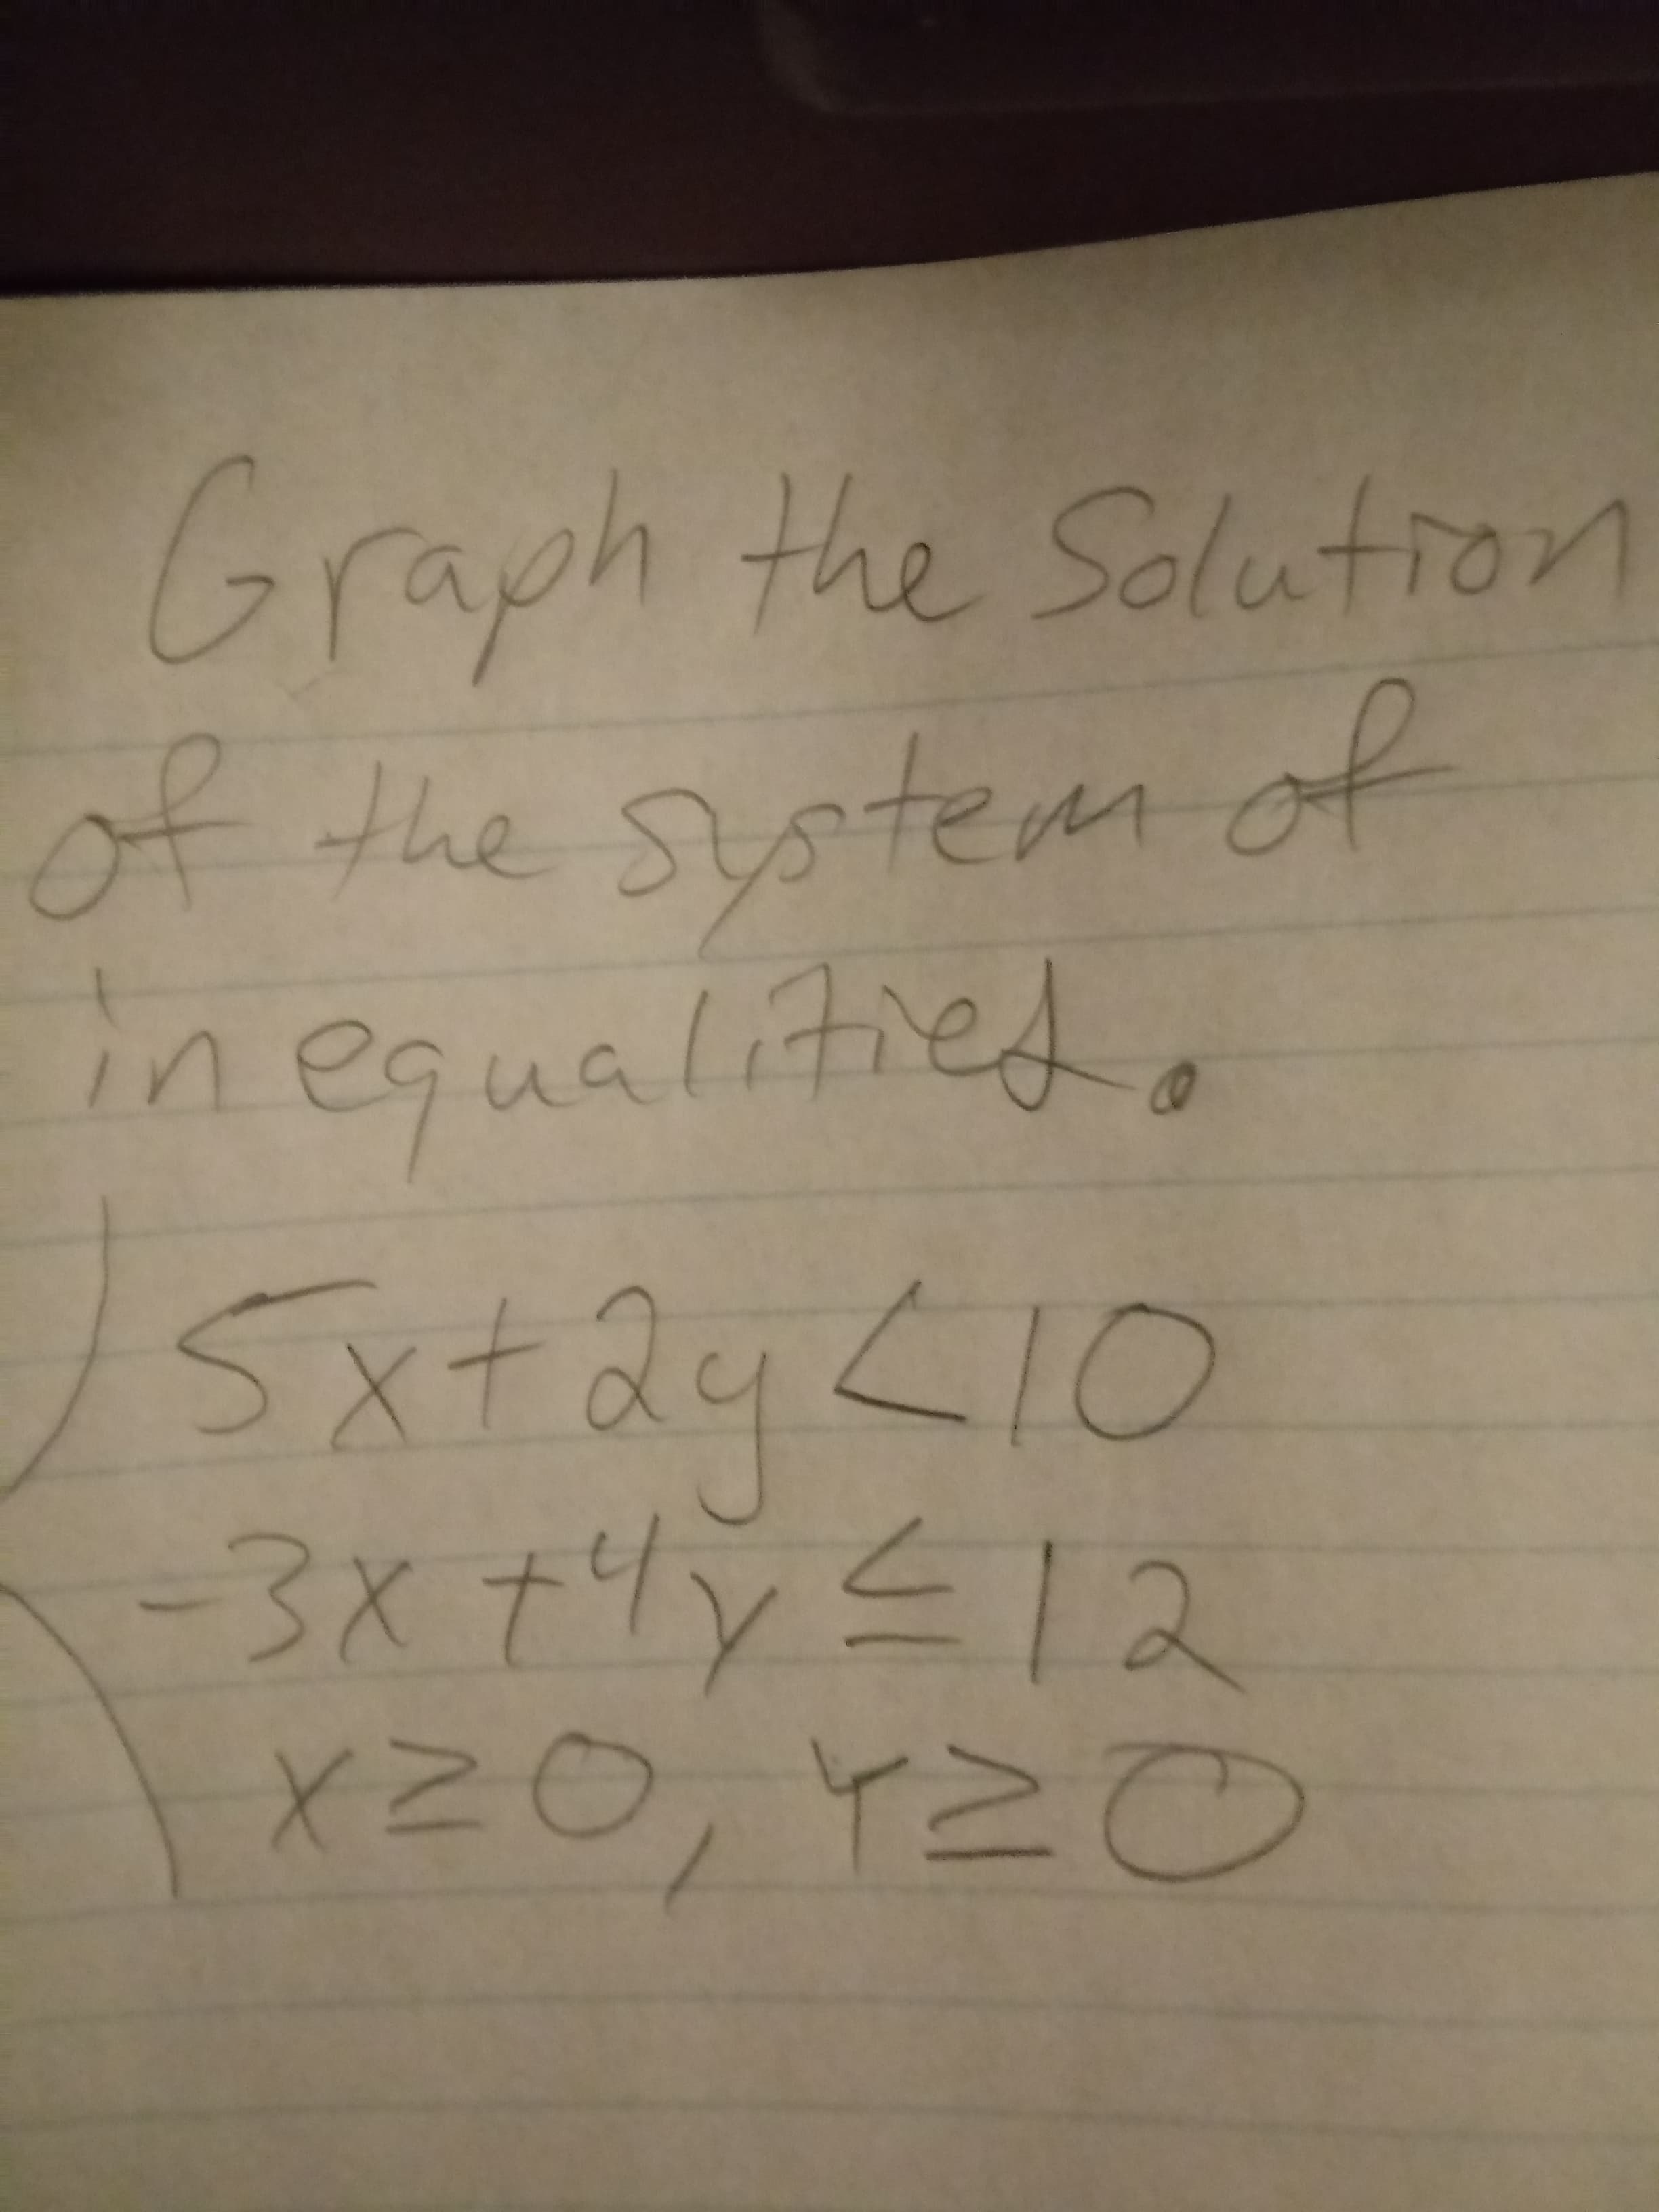 Graph the Solution
of the syotem of
in egualitiedo
1.
15xt24<10
-3x+4yE12
x20, Y2O
XTO
